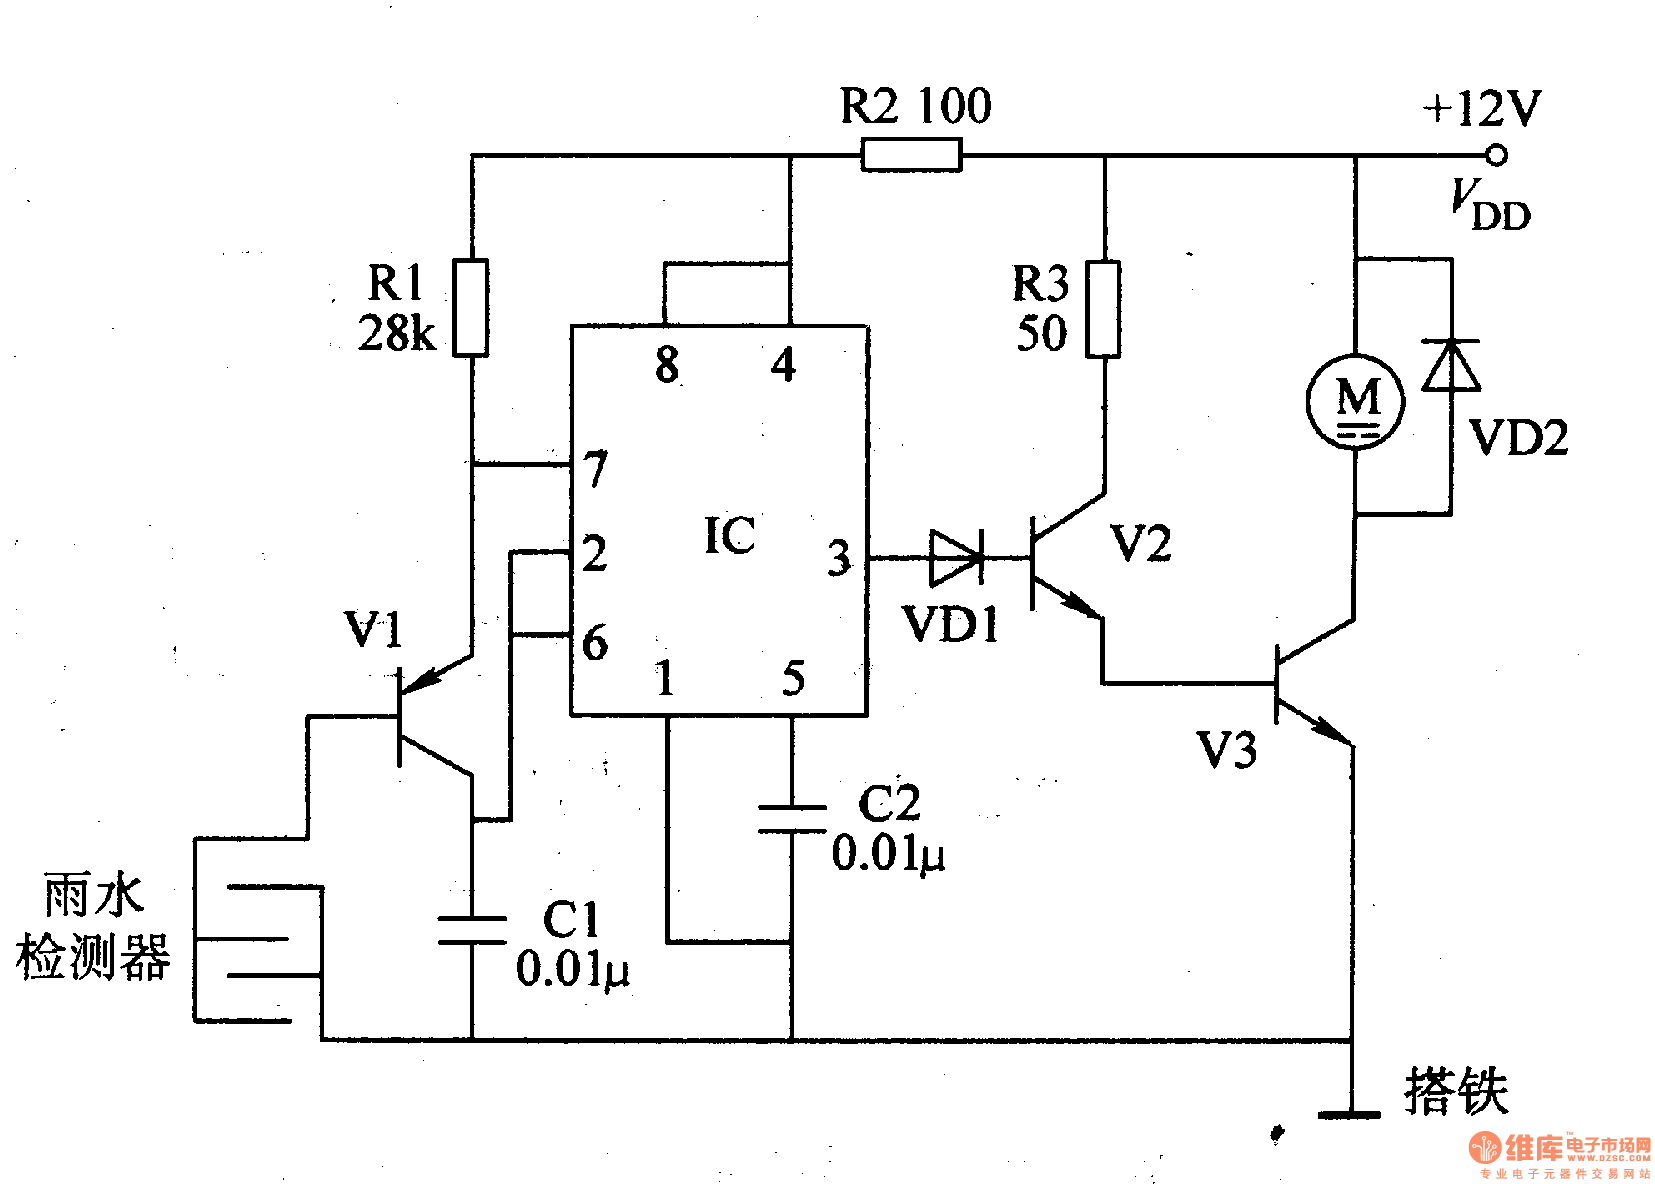 Car Windshield Wiper Controller (the 3rd) - Signal_Processing - Circuit